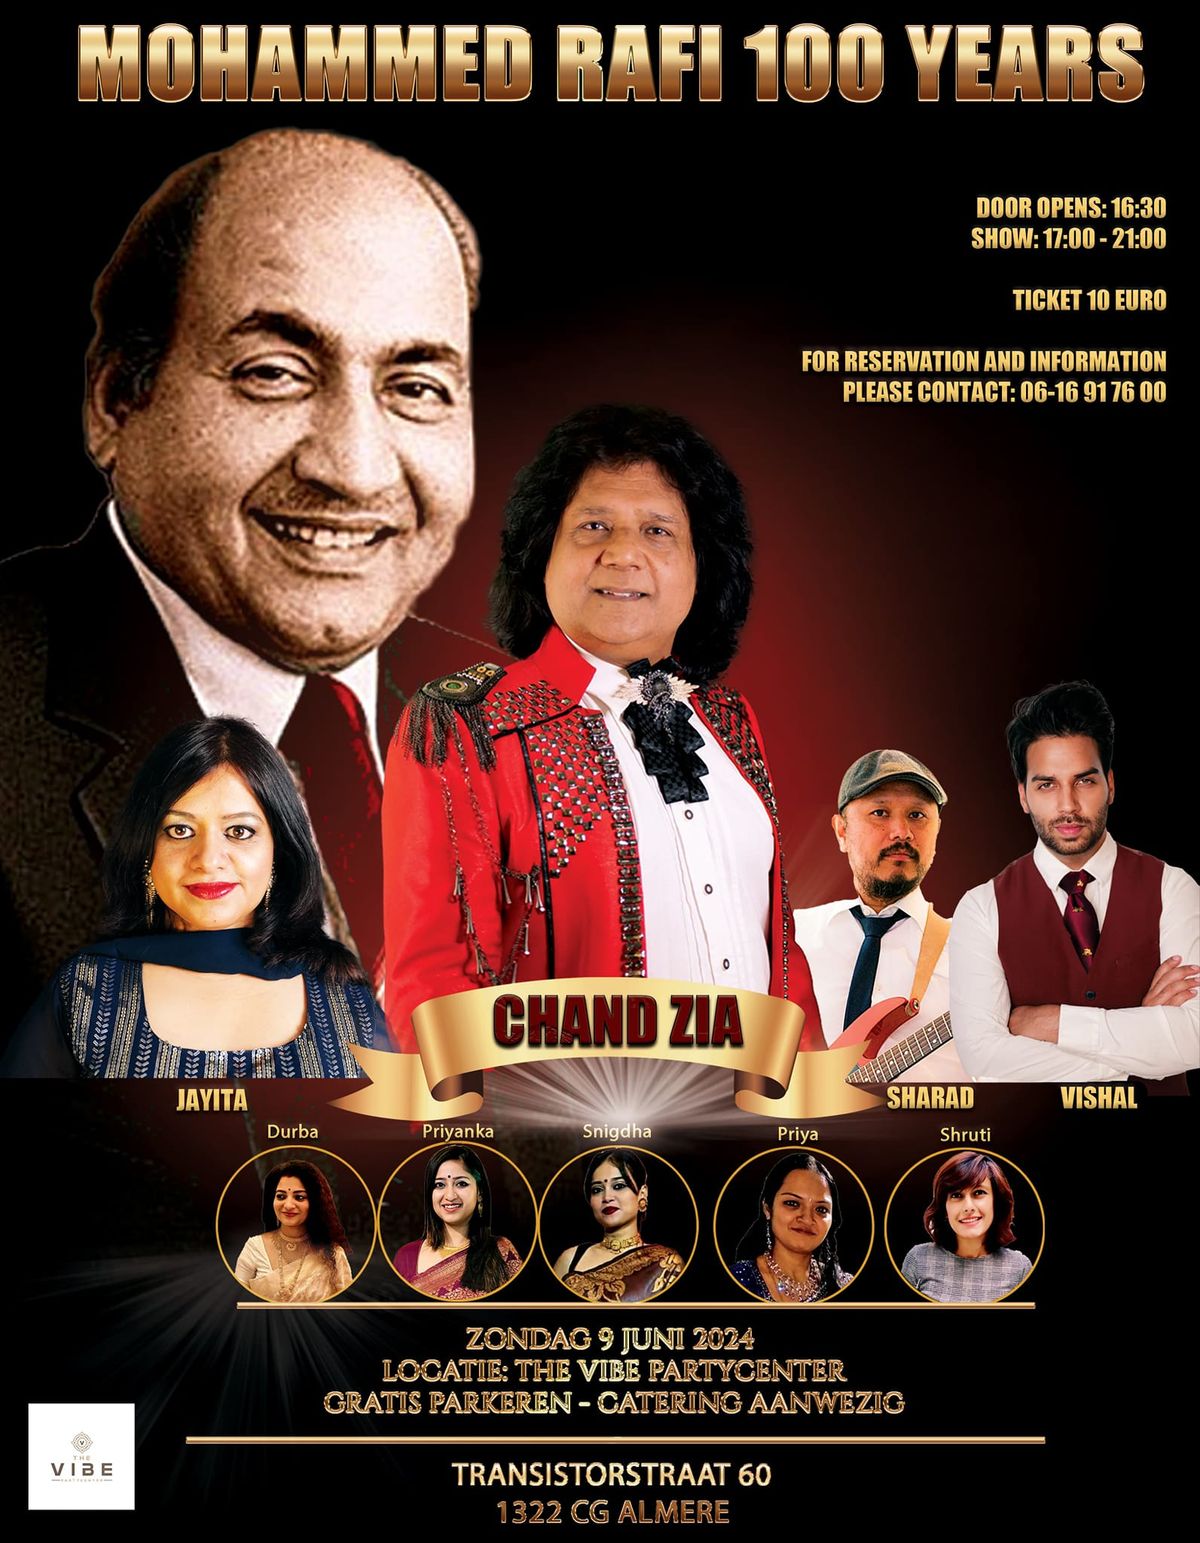 Md Rafi 100 years by Chand Zia